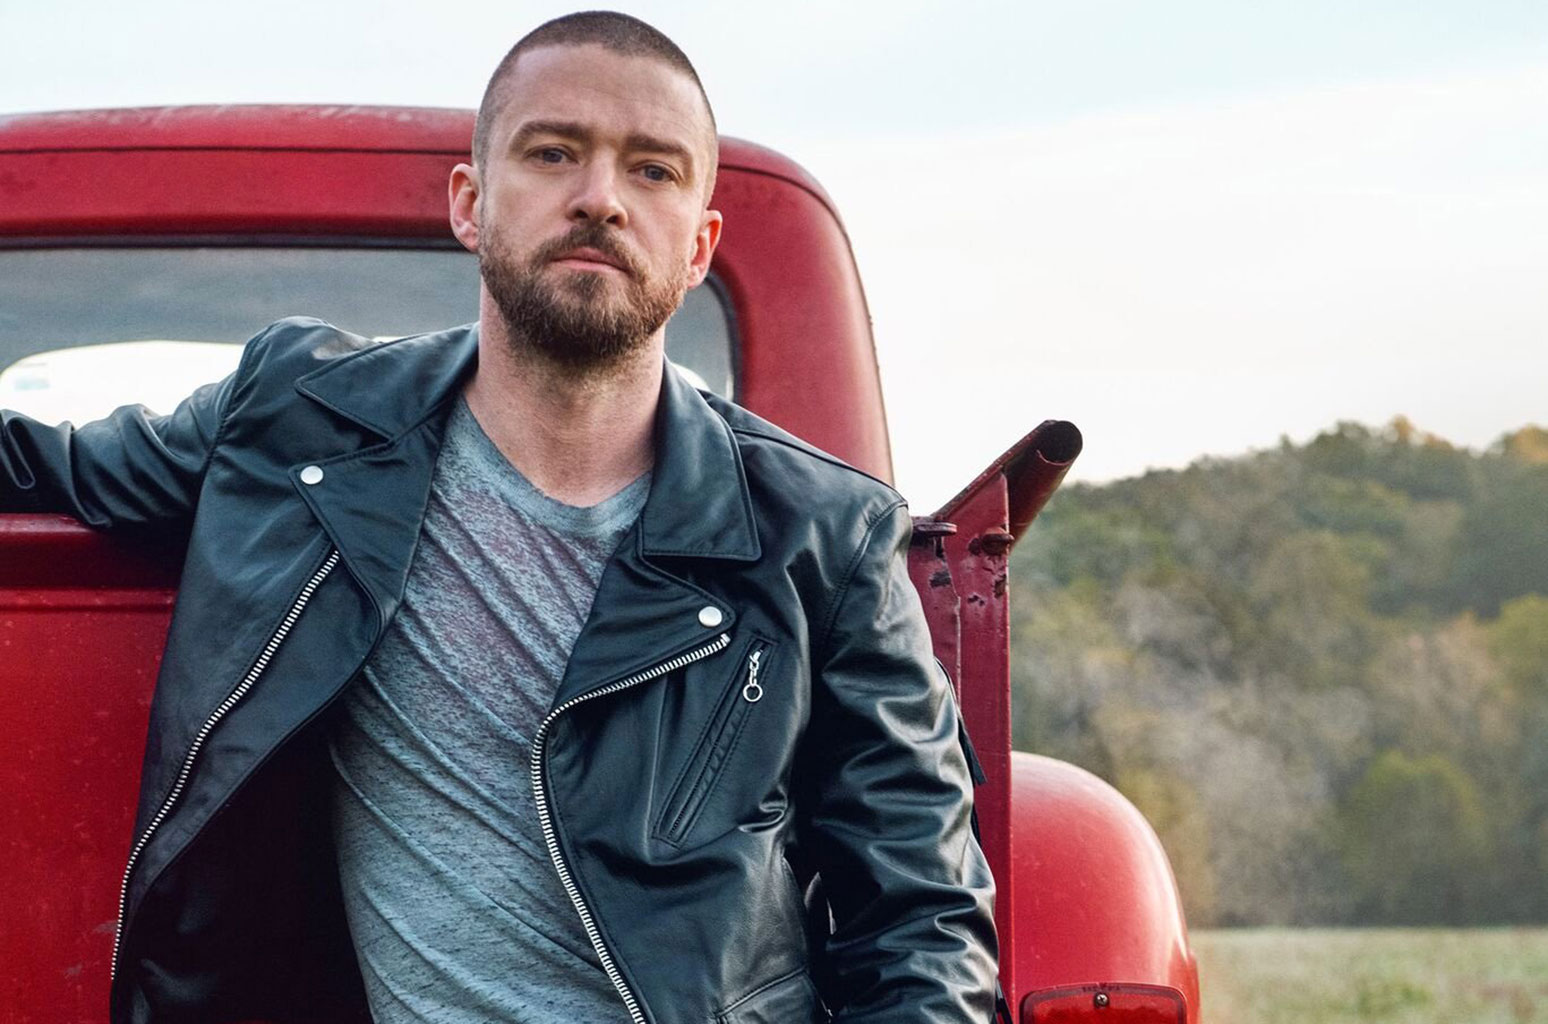 You got: Justin Timberlake! Choose Some Disney Guys and We’ll Give You a Hot Celeb Boyfriend